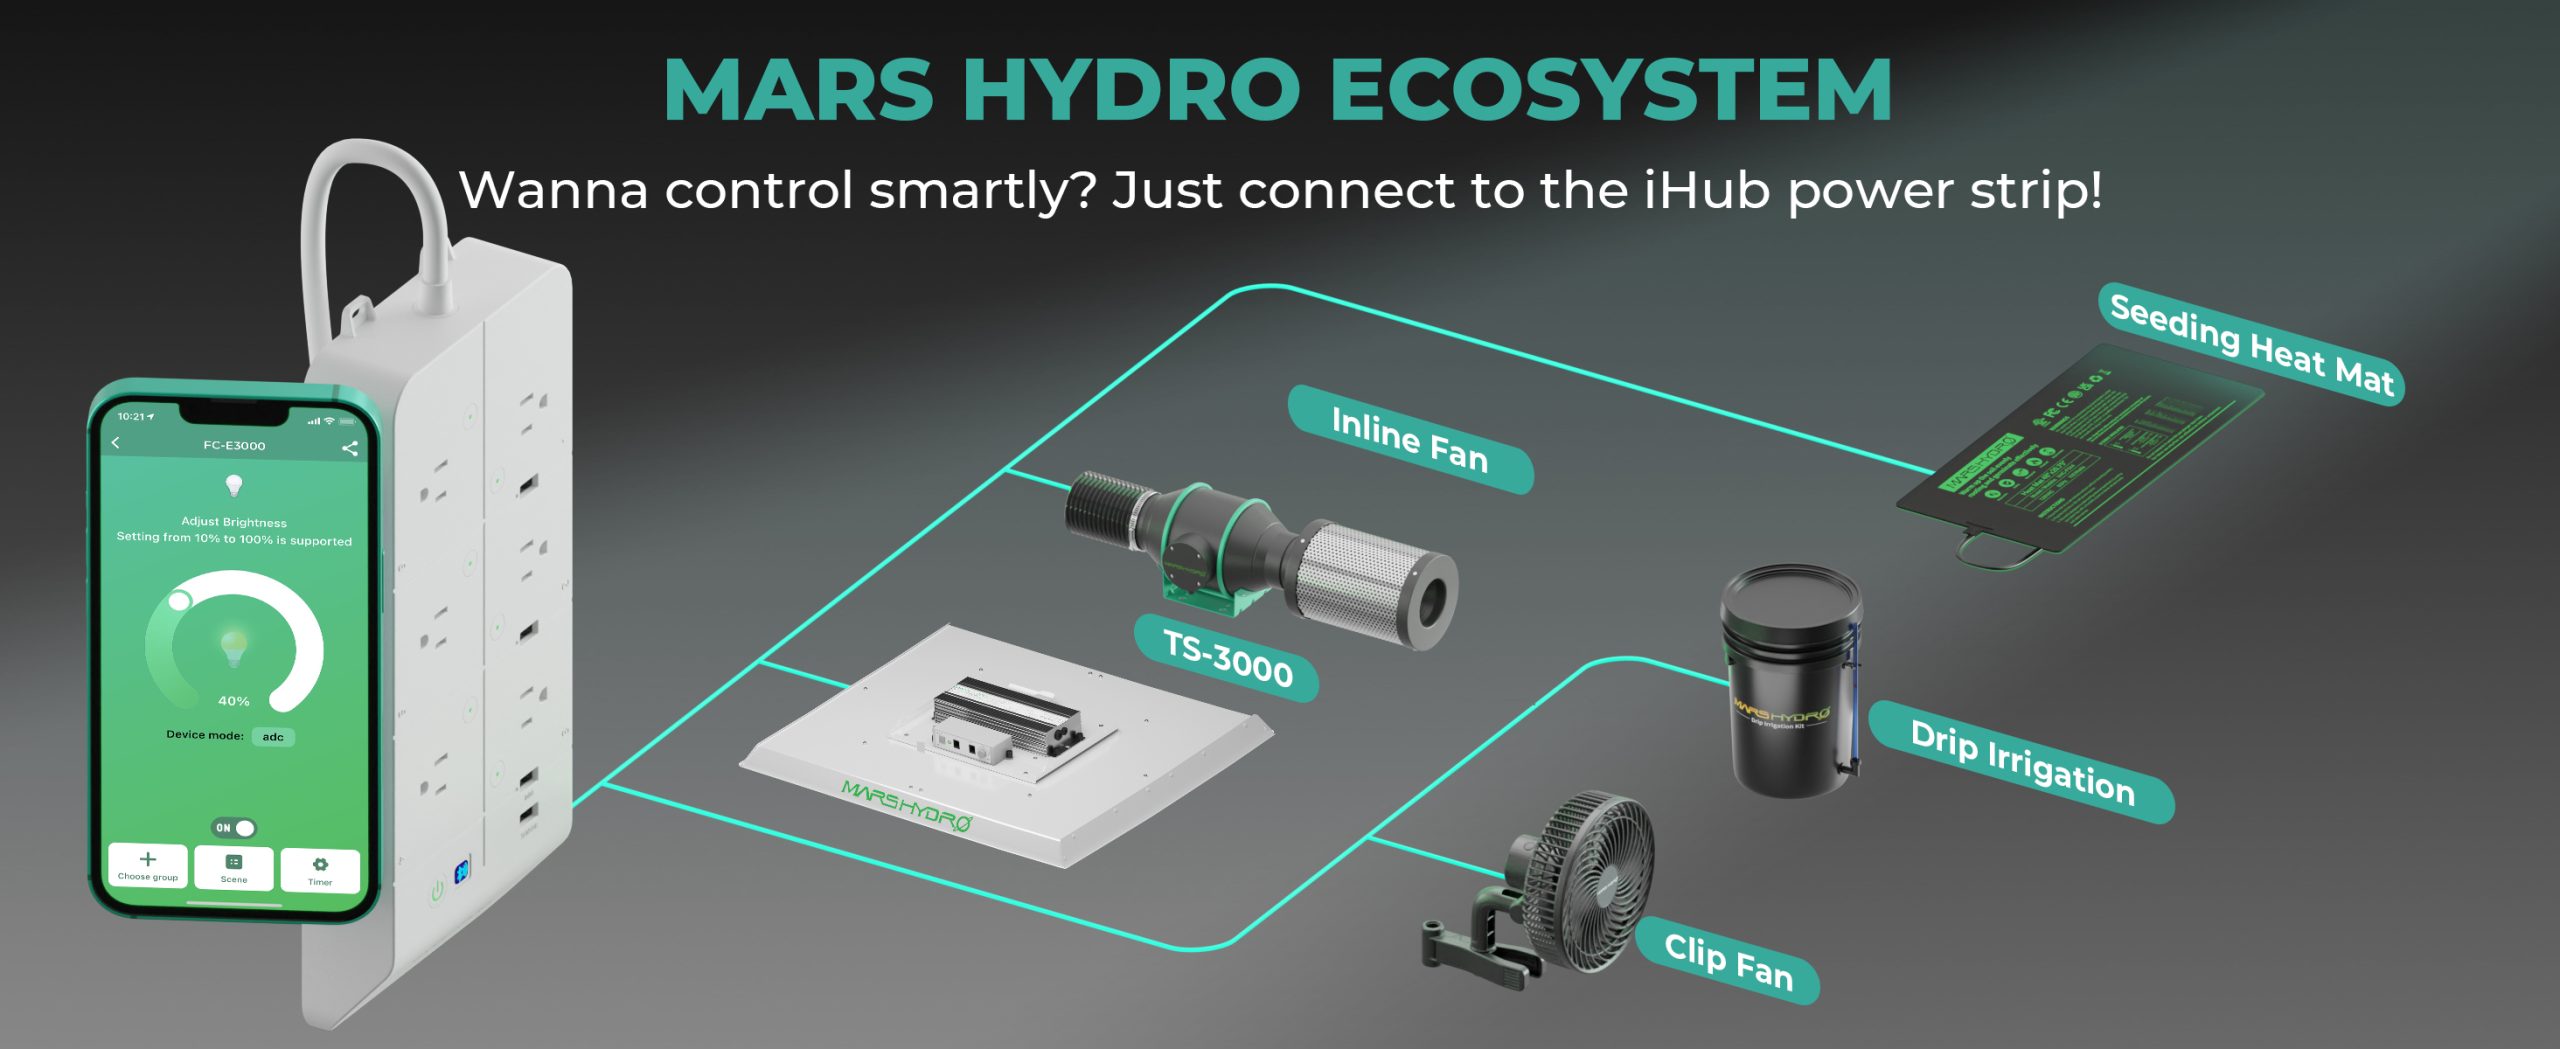 MARS-HYDRO-ECO-SYSTEM-Wanna-control-smartly-Just-connect-to-the-iHub-power-strip-3-scaled.jpg